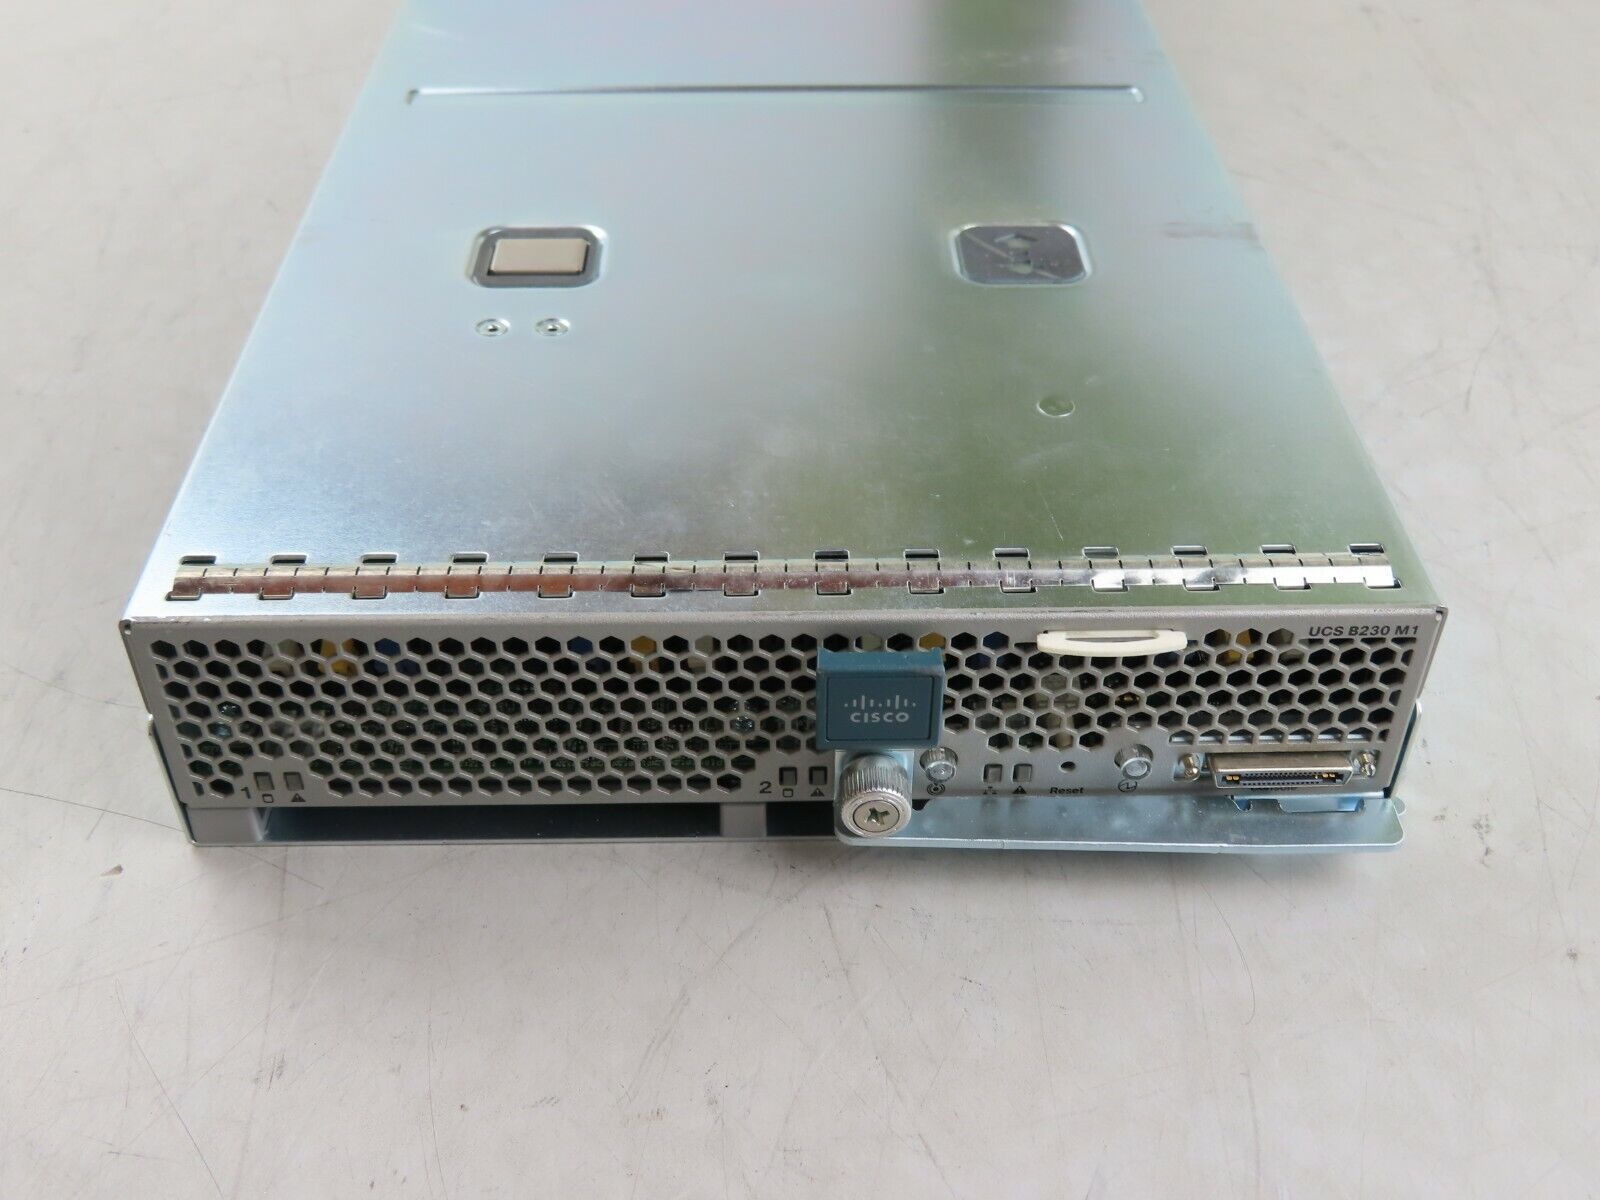 Lot 2x Cisco UCS B230 Blade Server Chassis only NO ram or CPU